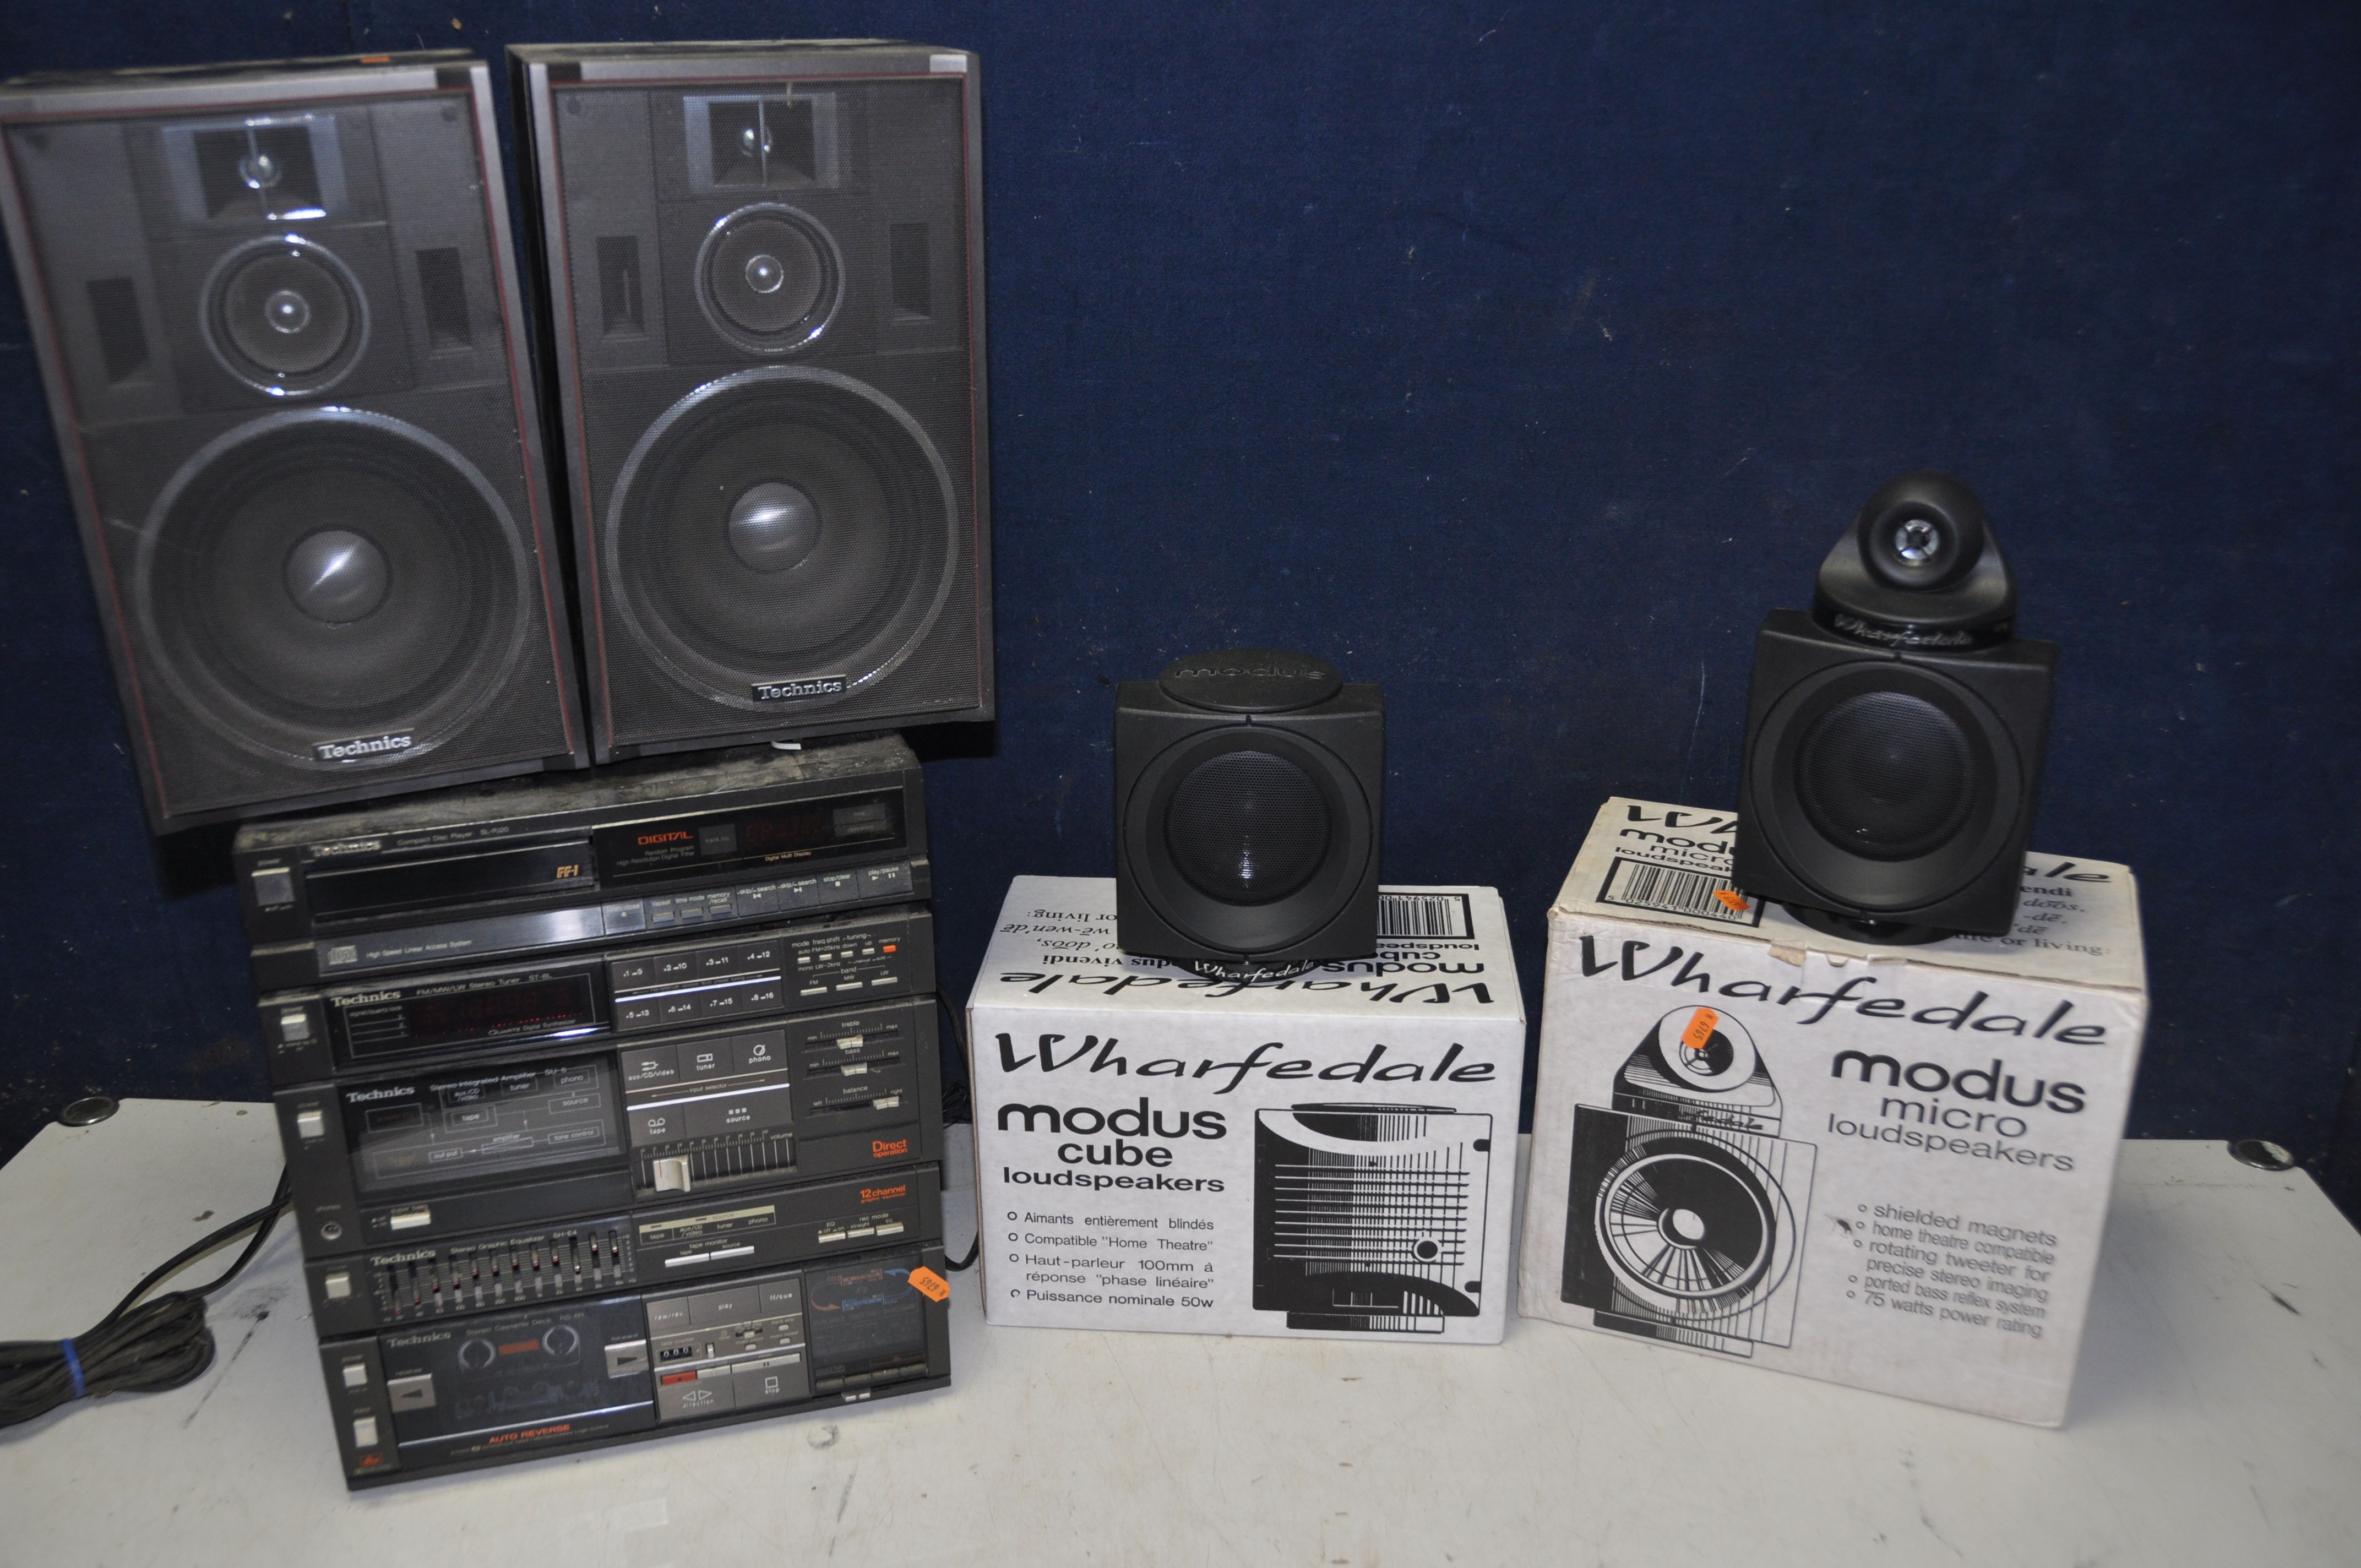 TWO BOXED PAIRS OF WHARFDALE MODUS SPEAKERS, comprising a pair of Wharfdale modus micro cube